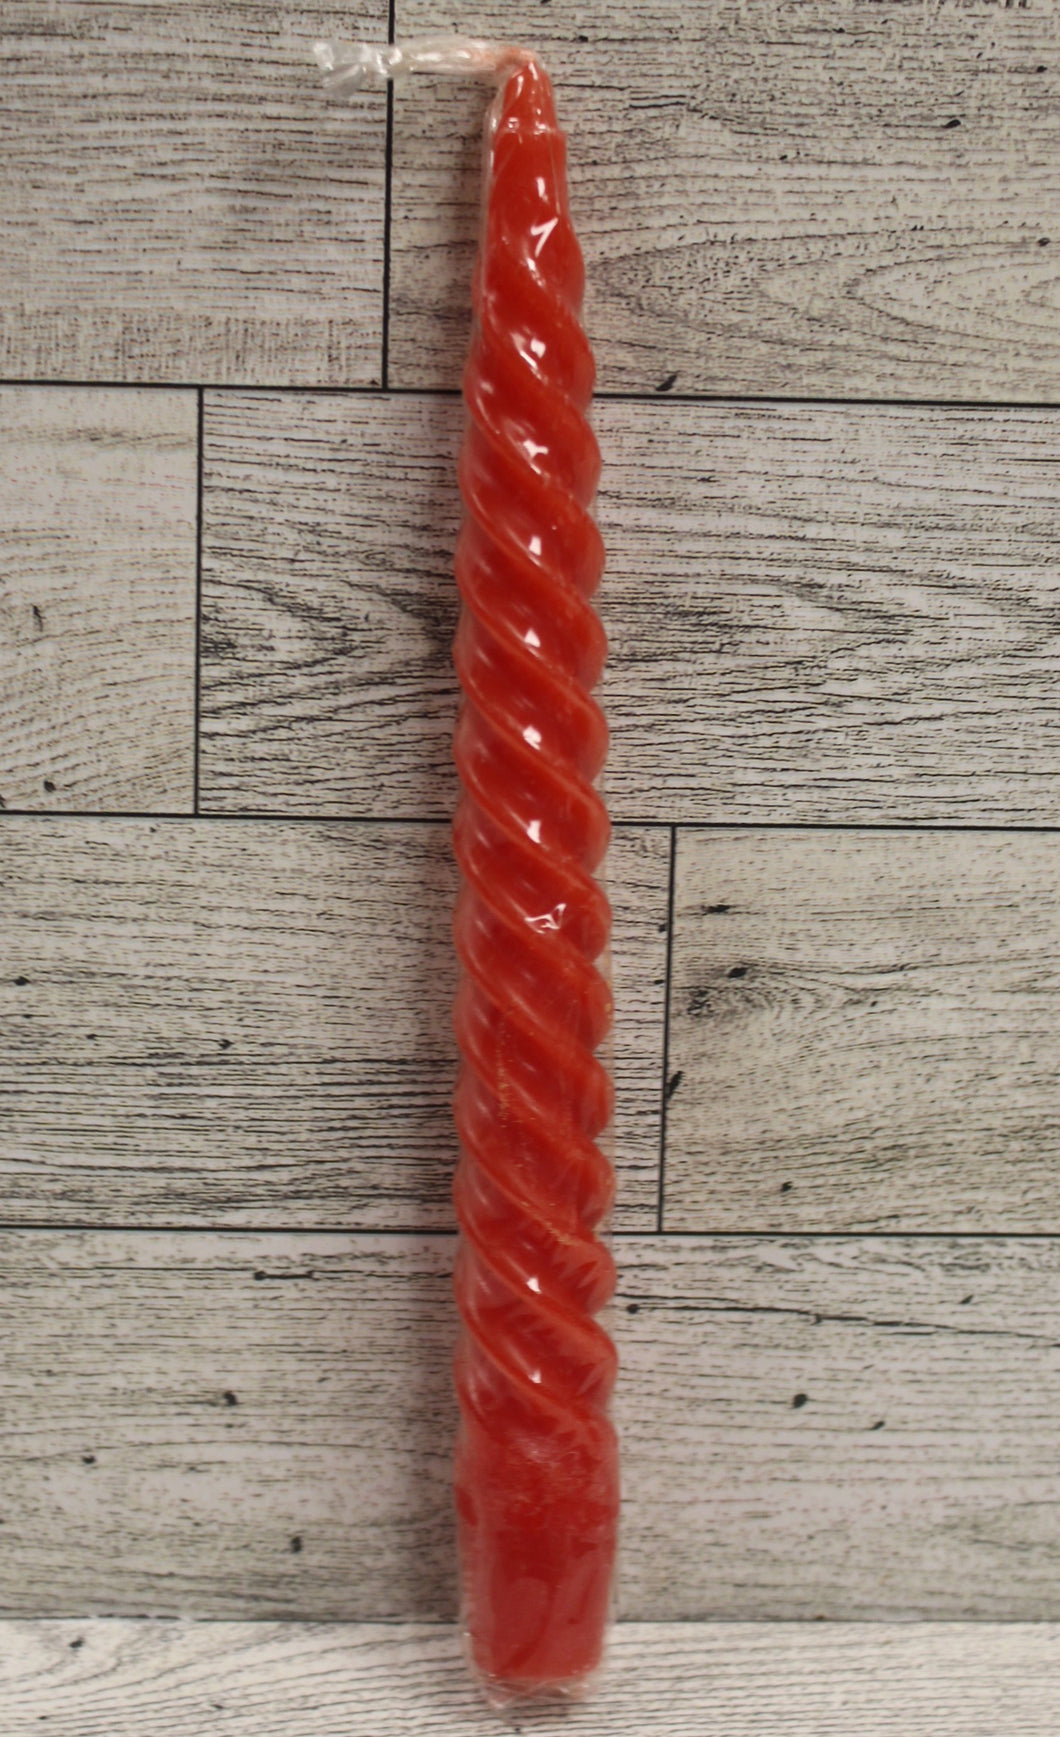 Vintage Spiral Hallmark Candle - Red - 8 Inch - USA Made - New